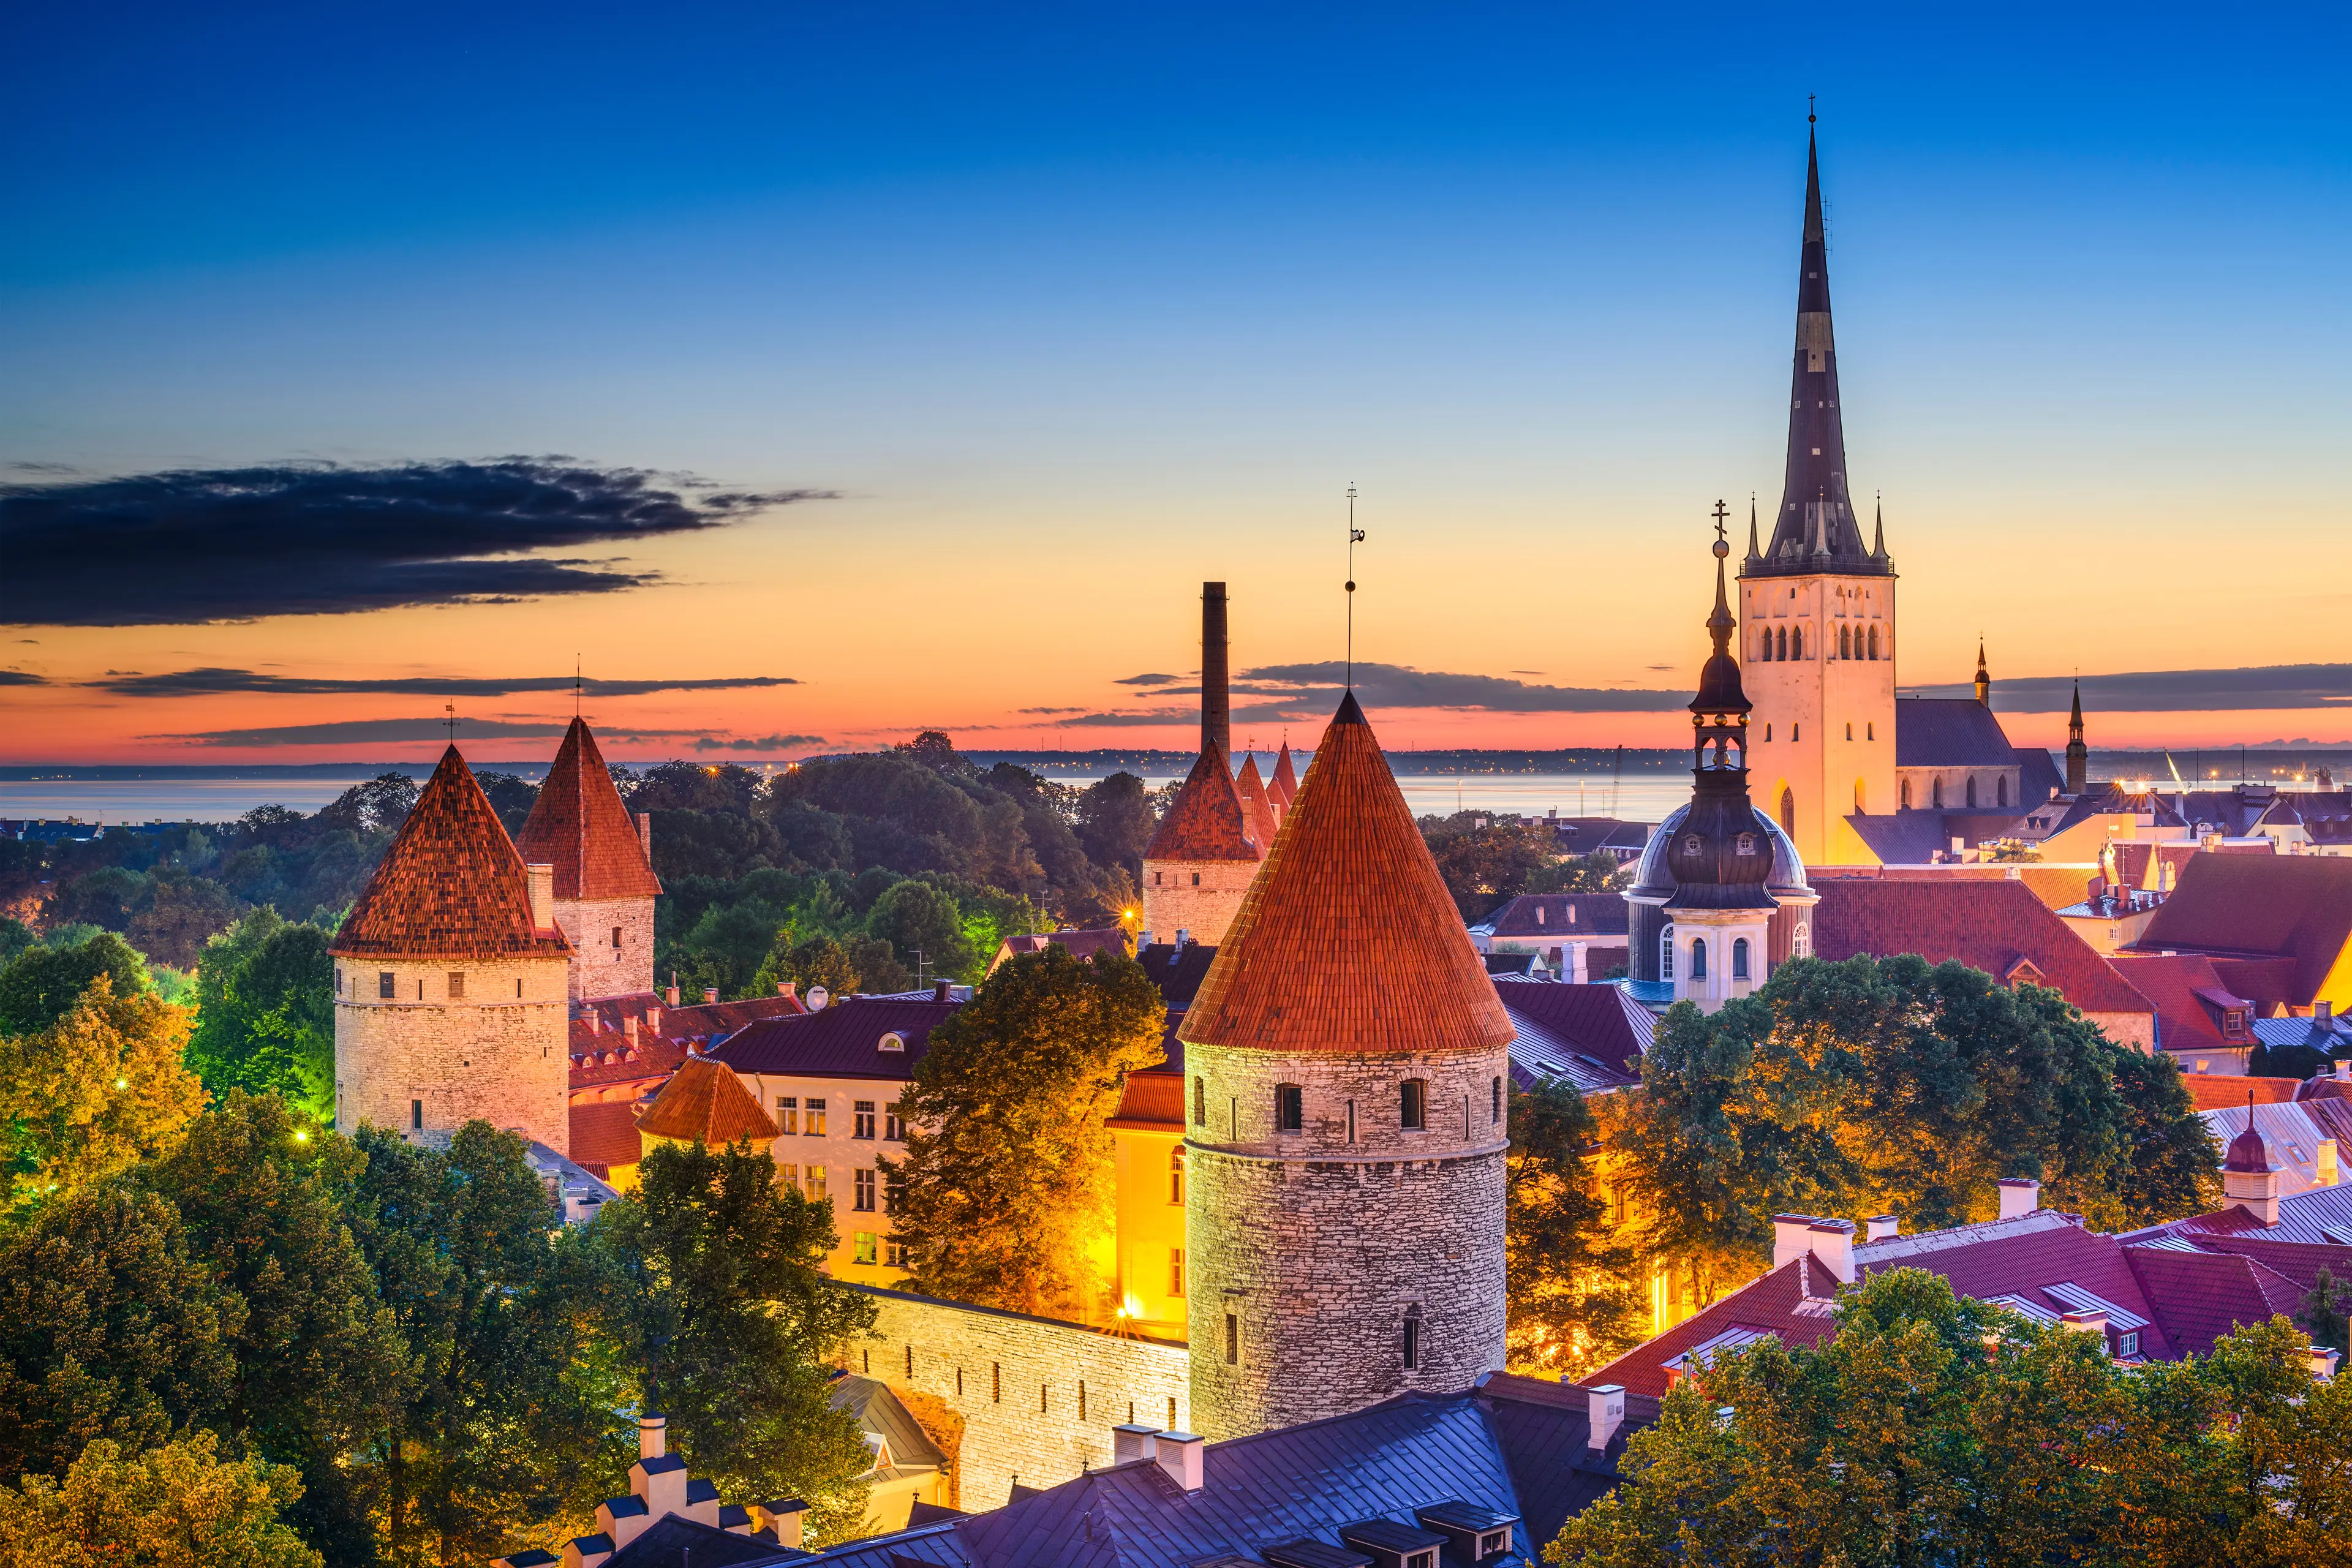 4-Day Local Family Experience: Food, Wine & Nightlife in Tallinn